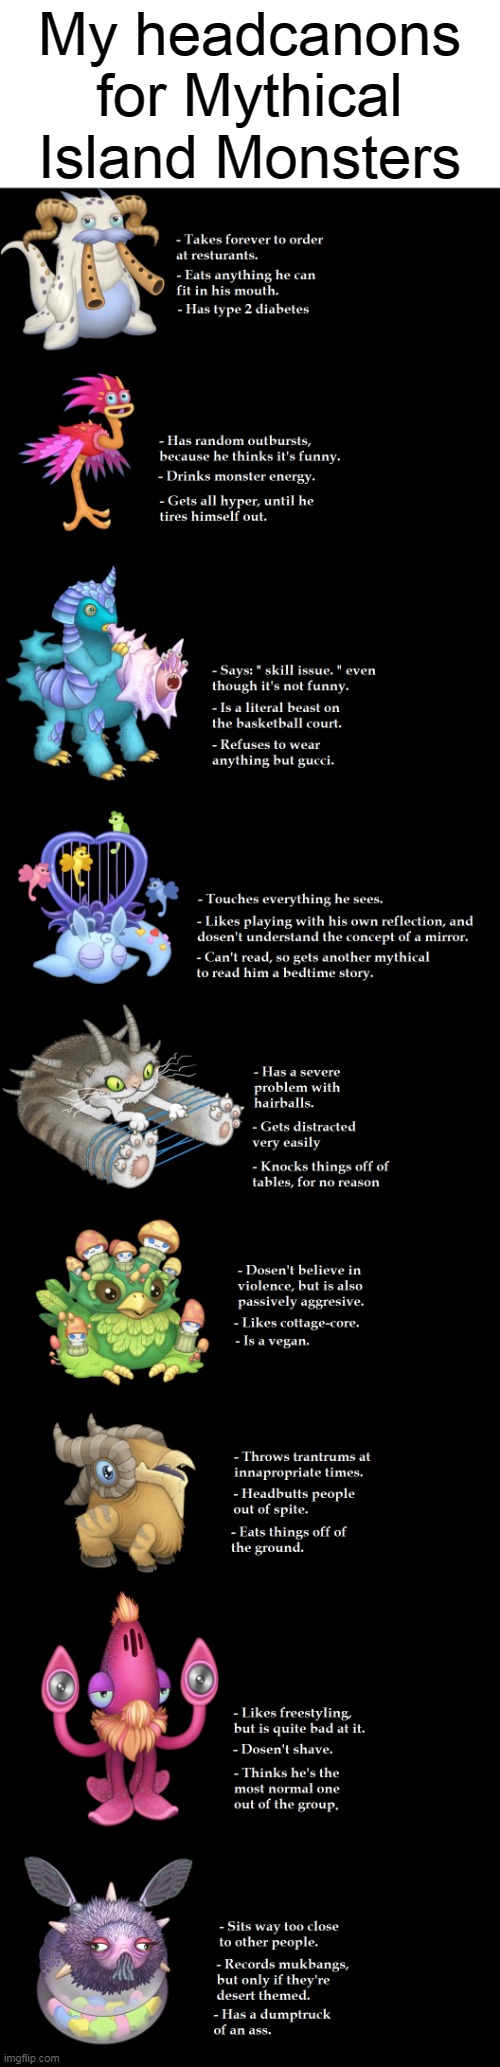 My headcanons for Mythical Island Monsters | image tagged in my singing monsters,mythical island,msm,nostalgia,mythicals,year of the mythical | made w/ Imgflip meme maker